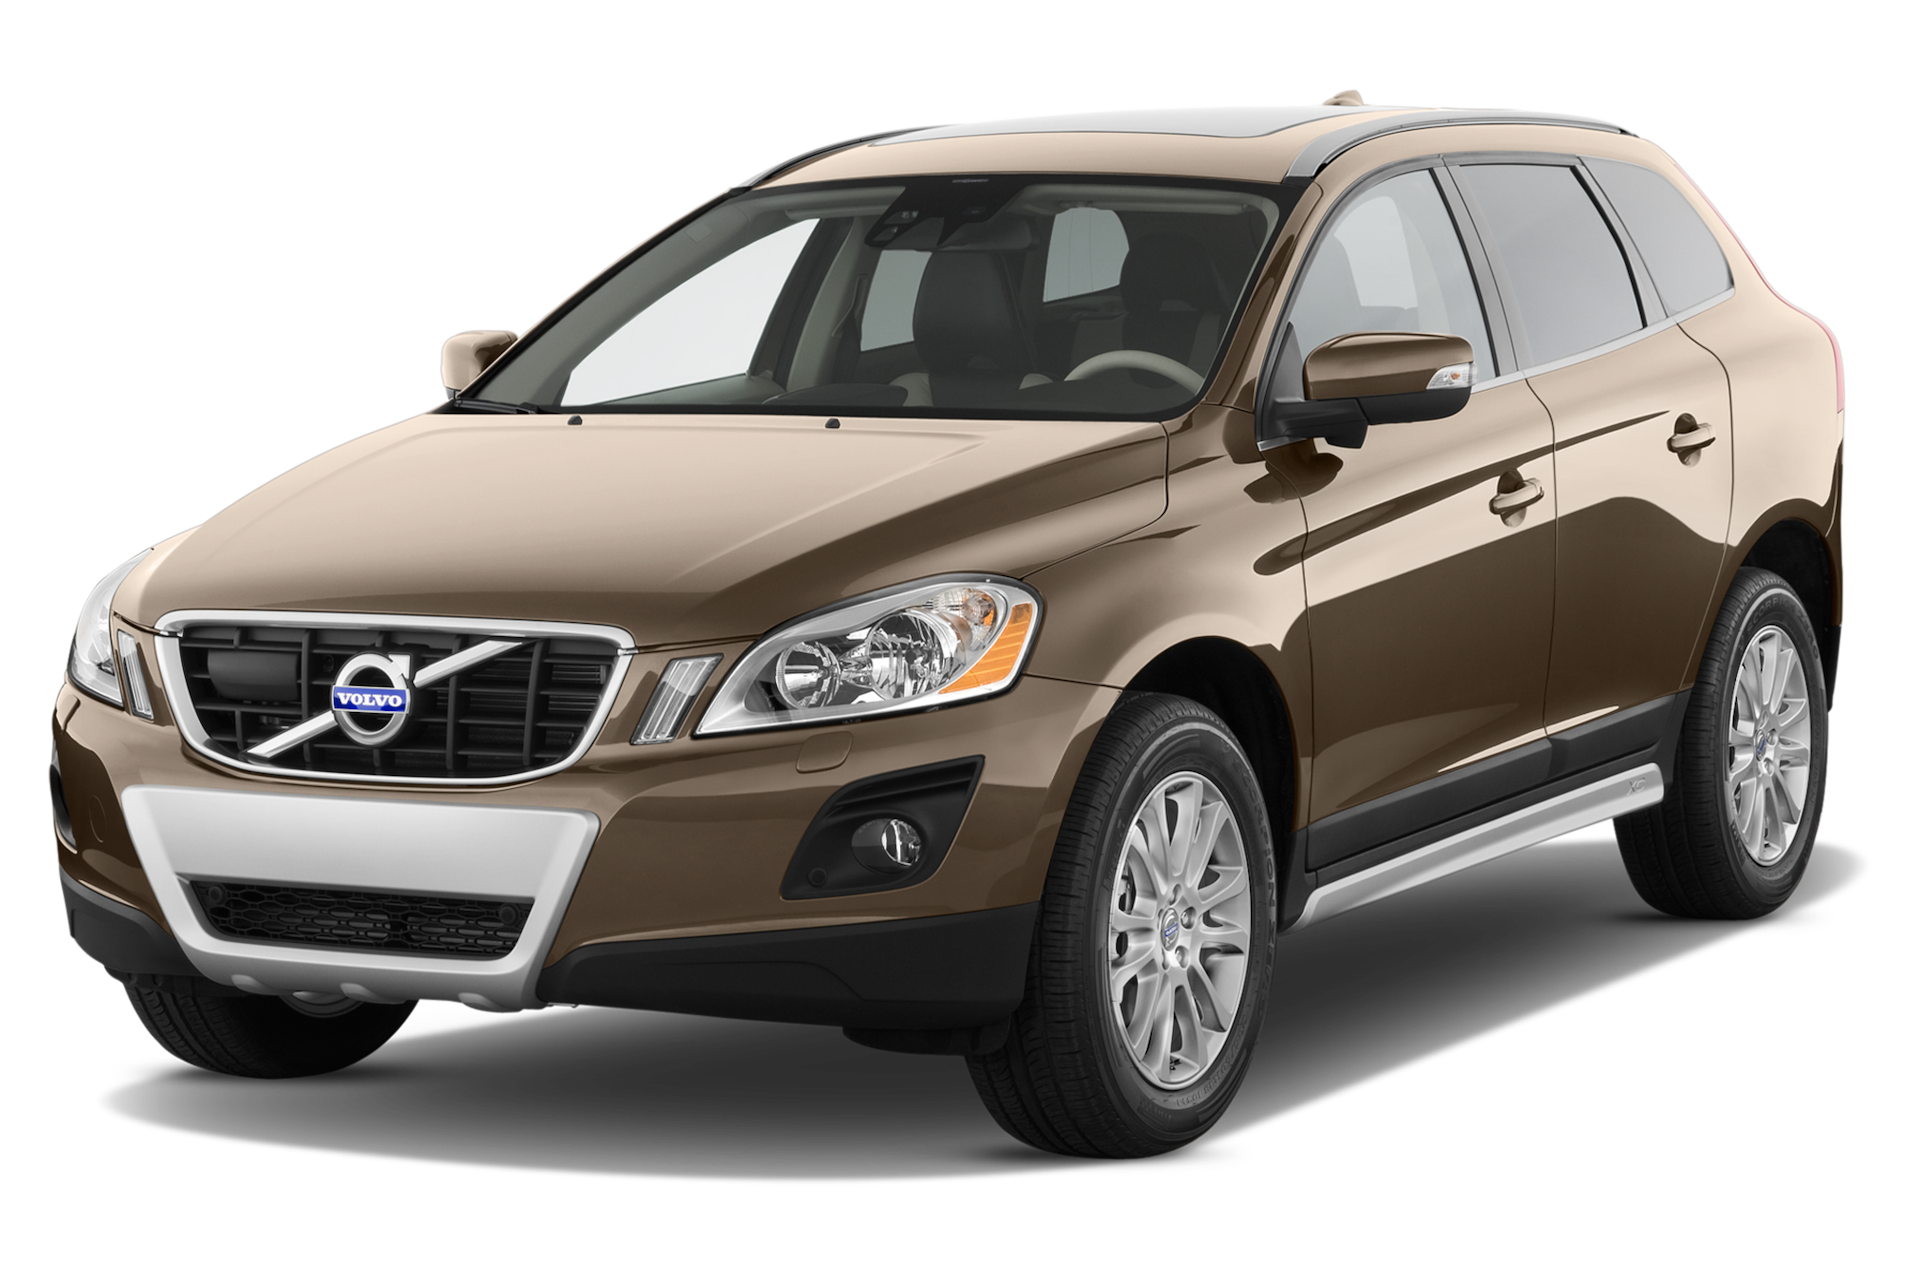 2010 Volvo XC60 Prices, Reviews, and Photos - MotorTrend